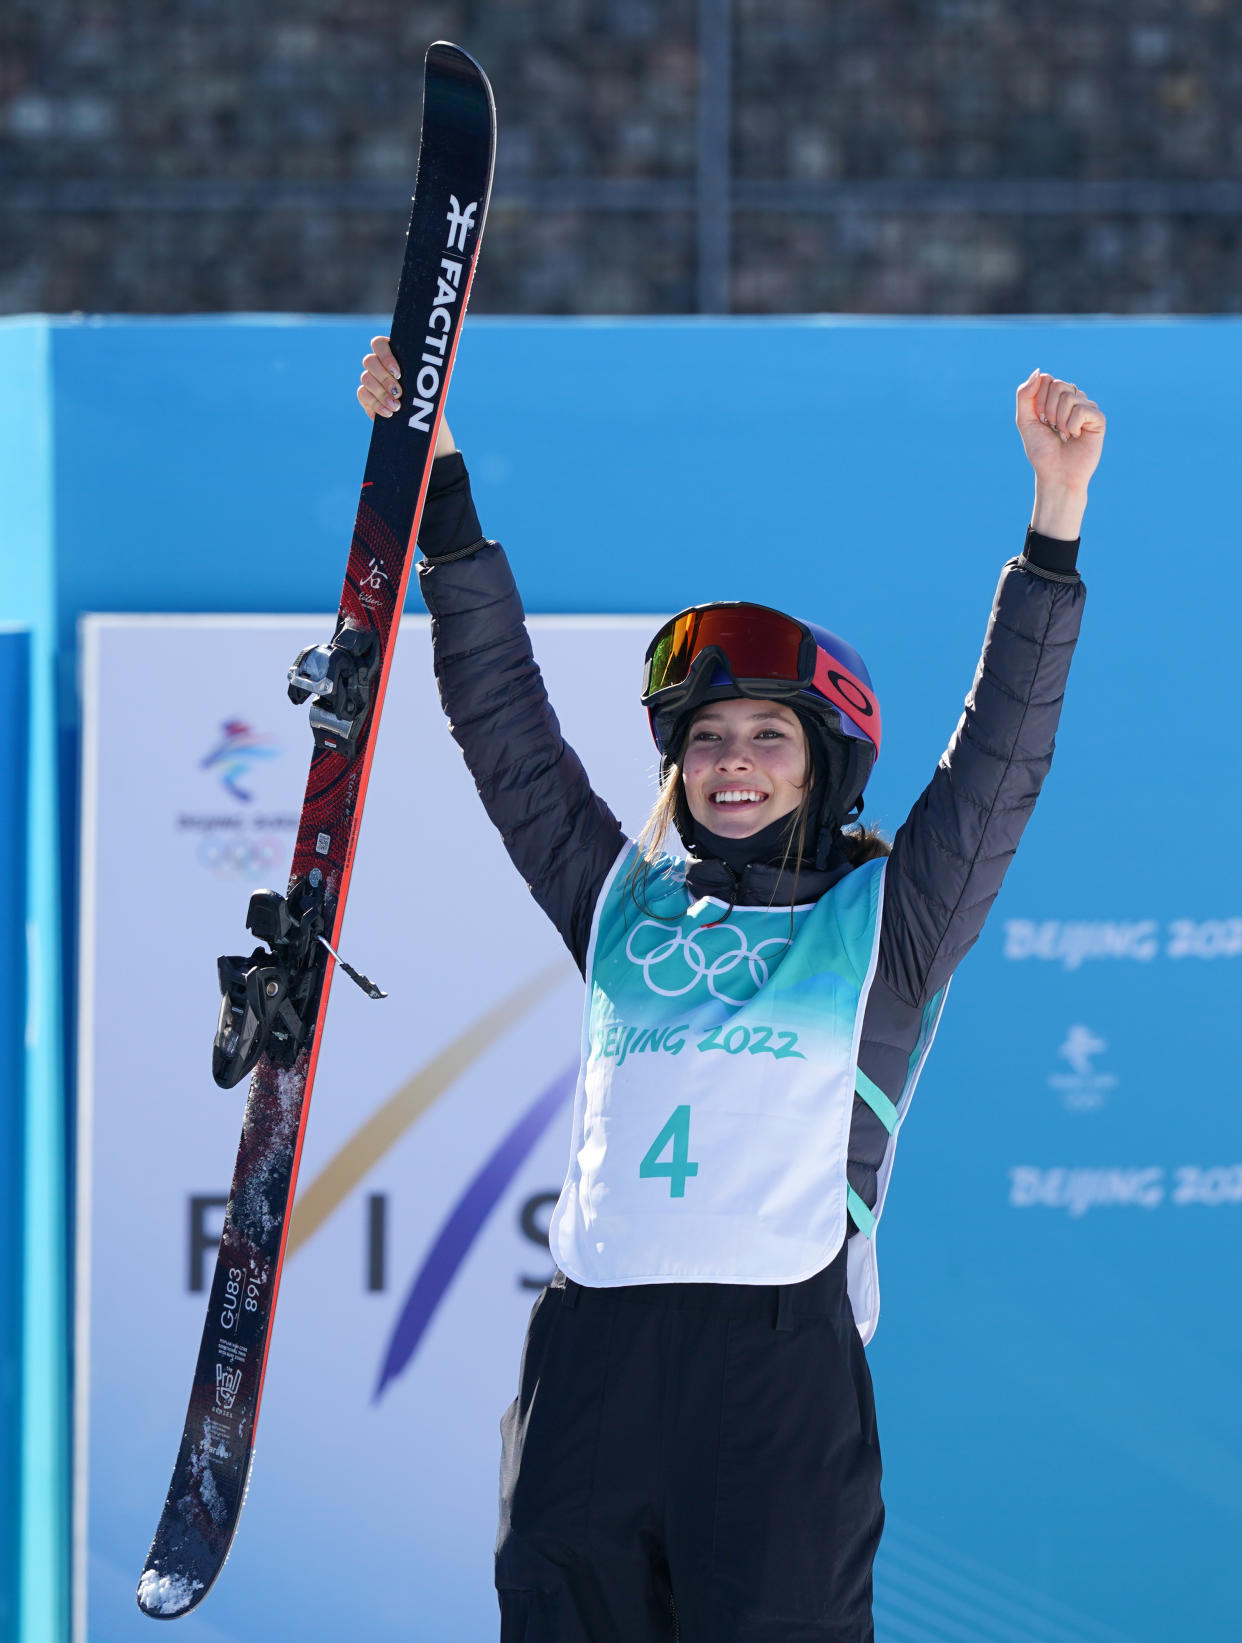 China's Eileen Gu celebrates winning gold during the freeski big air final at the Beijing 2022 Winter Olympic Games at Big Air Shougang in China on Tuesday February 8, 2022. (Andrew Milligan/PA Images via Getty Images)